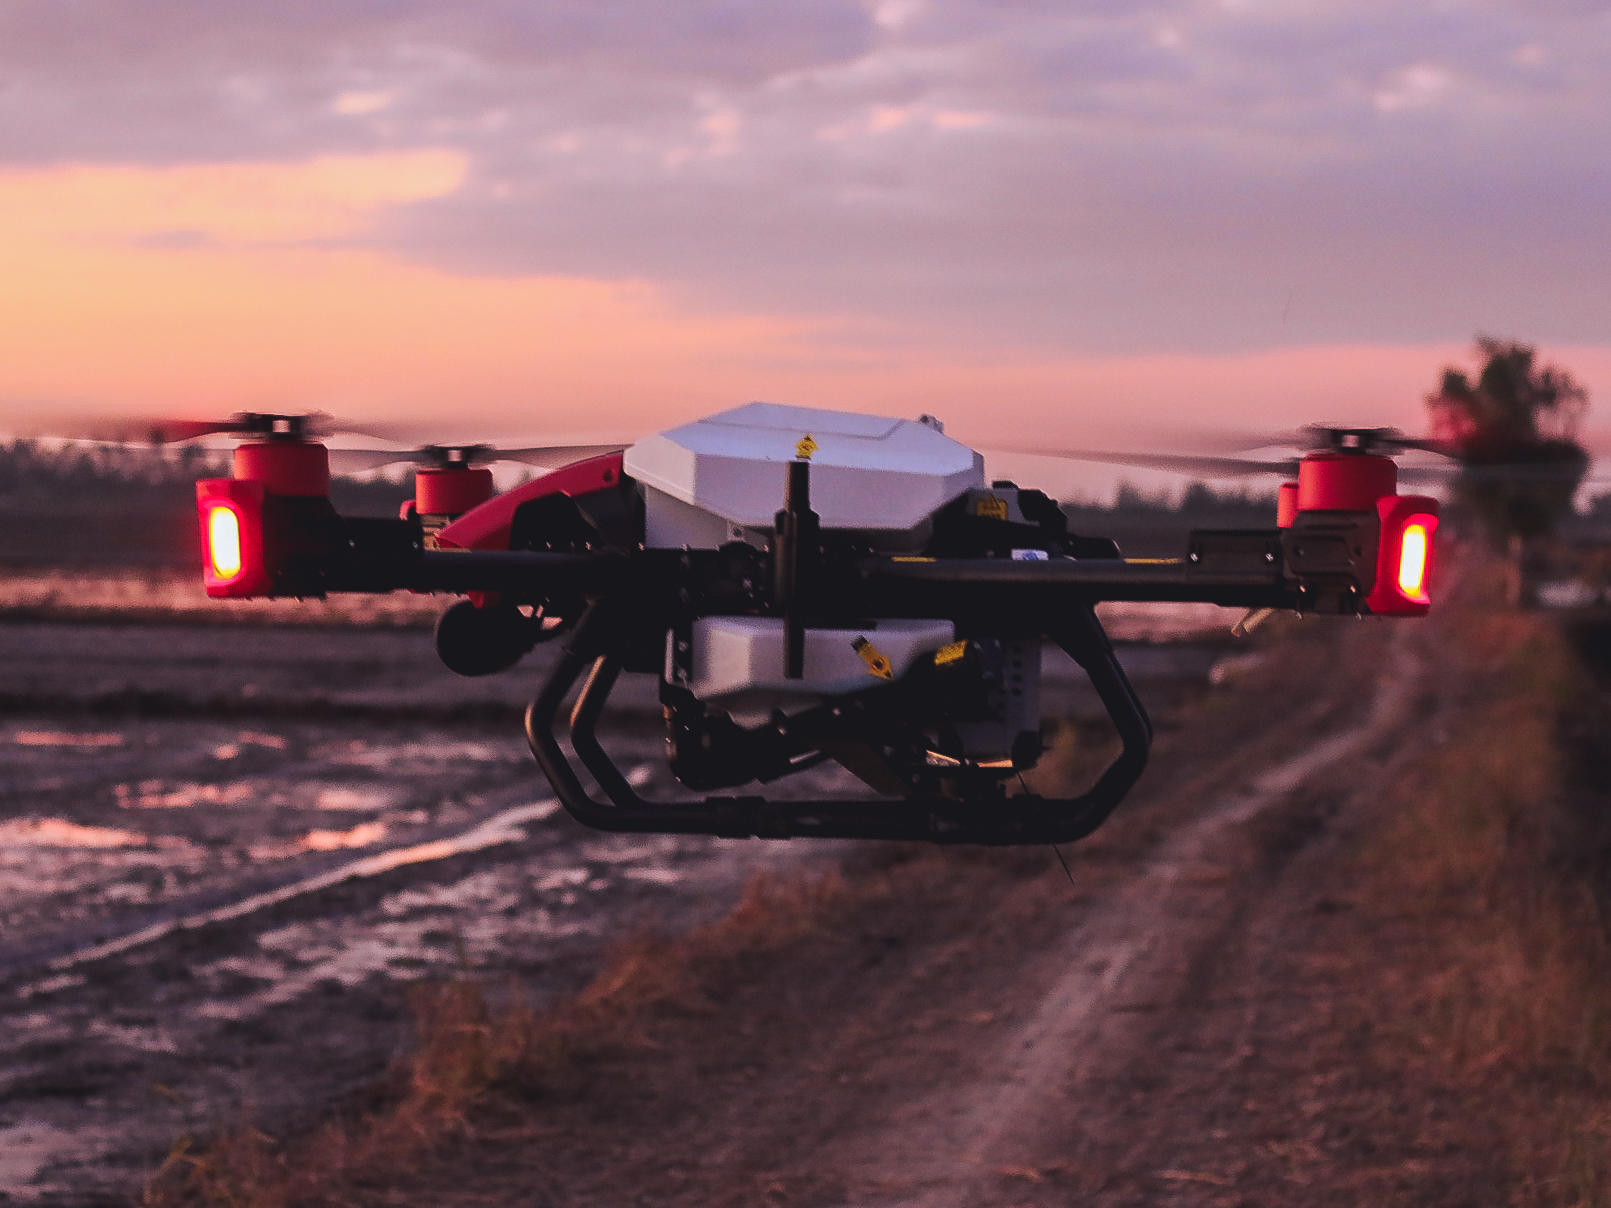 Shimmering in red lights, the XAG P40 agricultural drone with the RevoCast system flies into the sunset for rice seeding. The final round of operation is about to end.